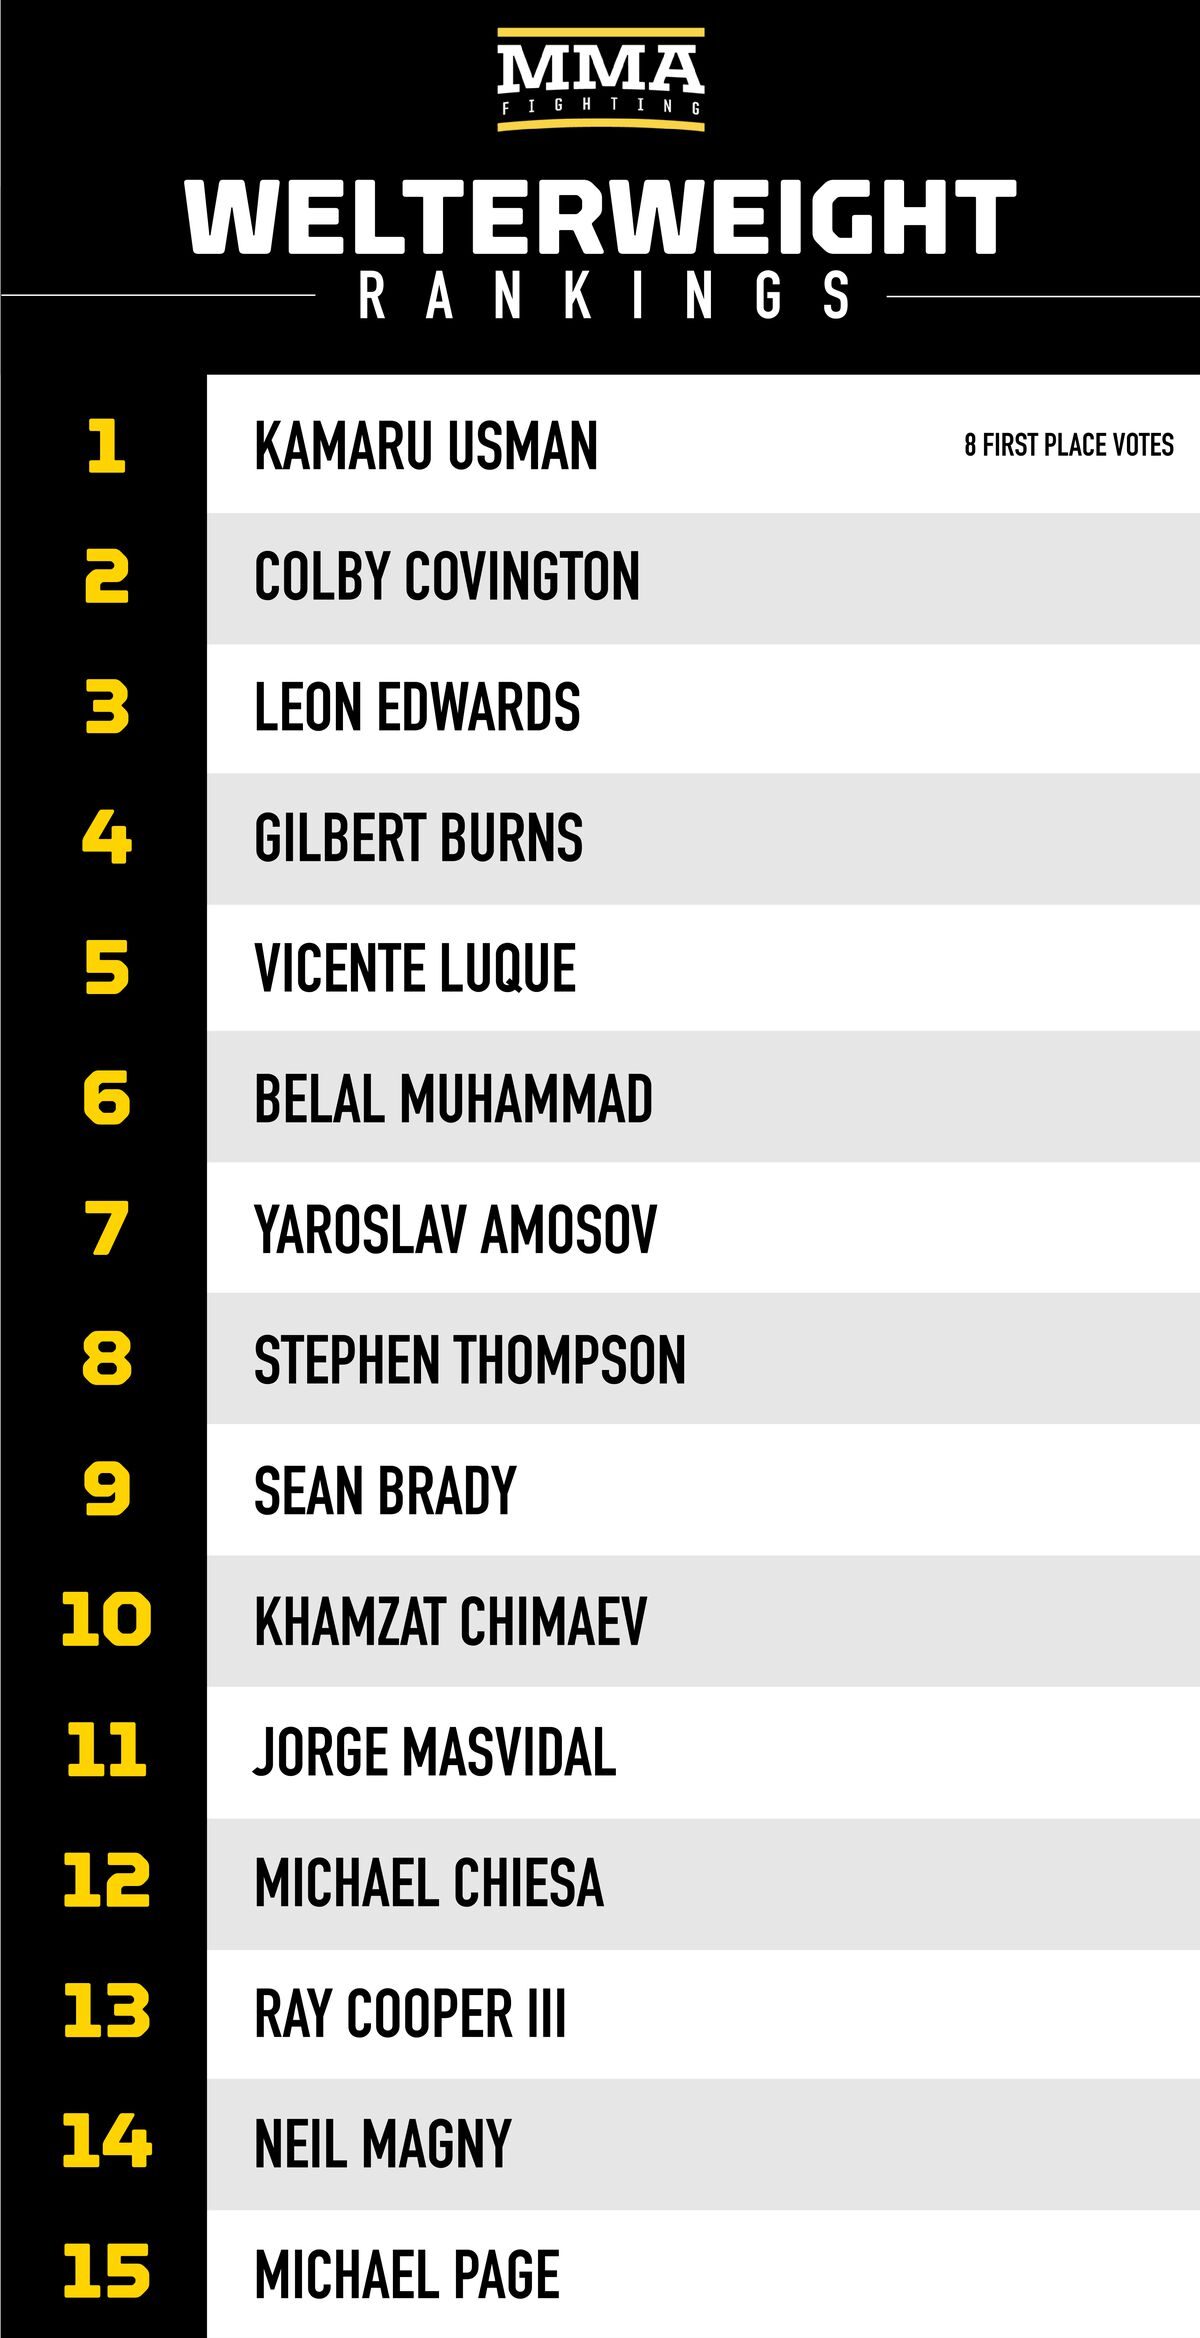 mmaf_rankings_welterweight_3_2_22